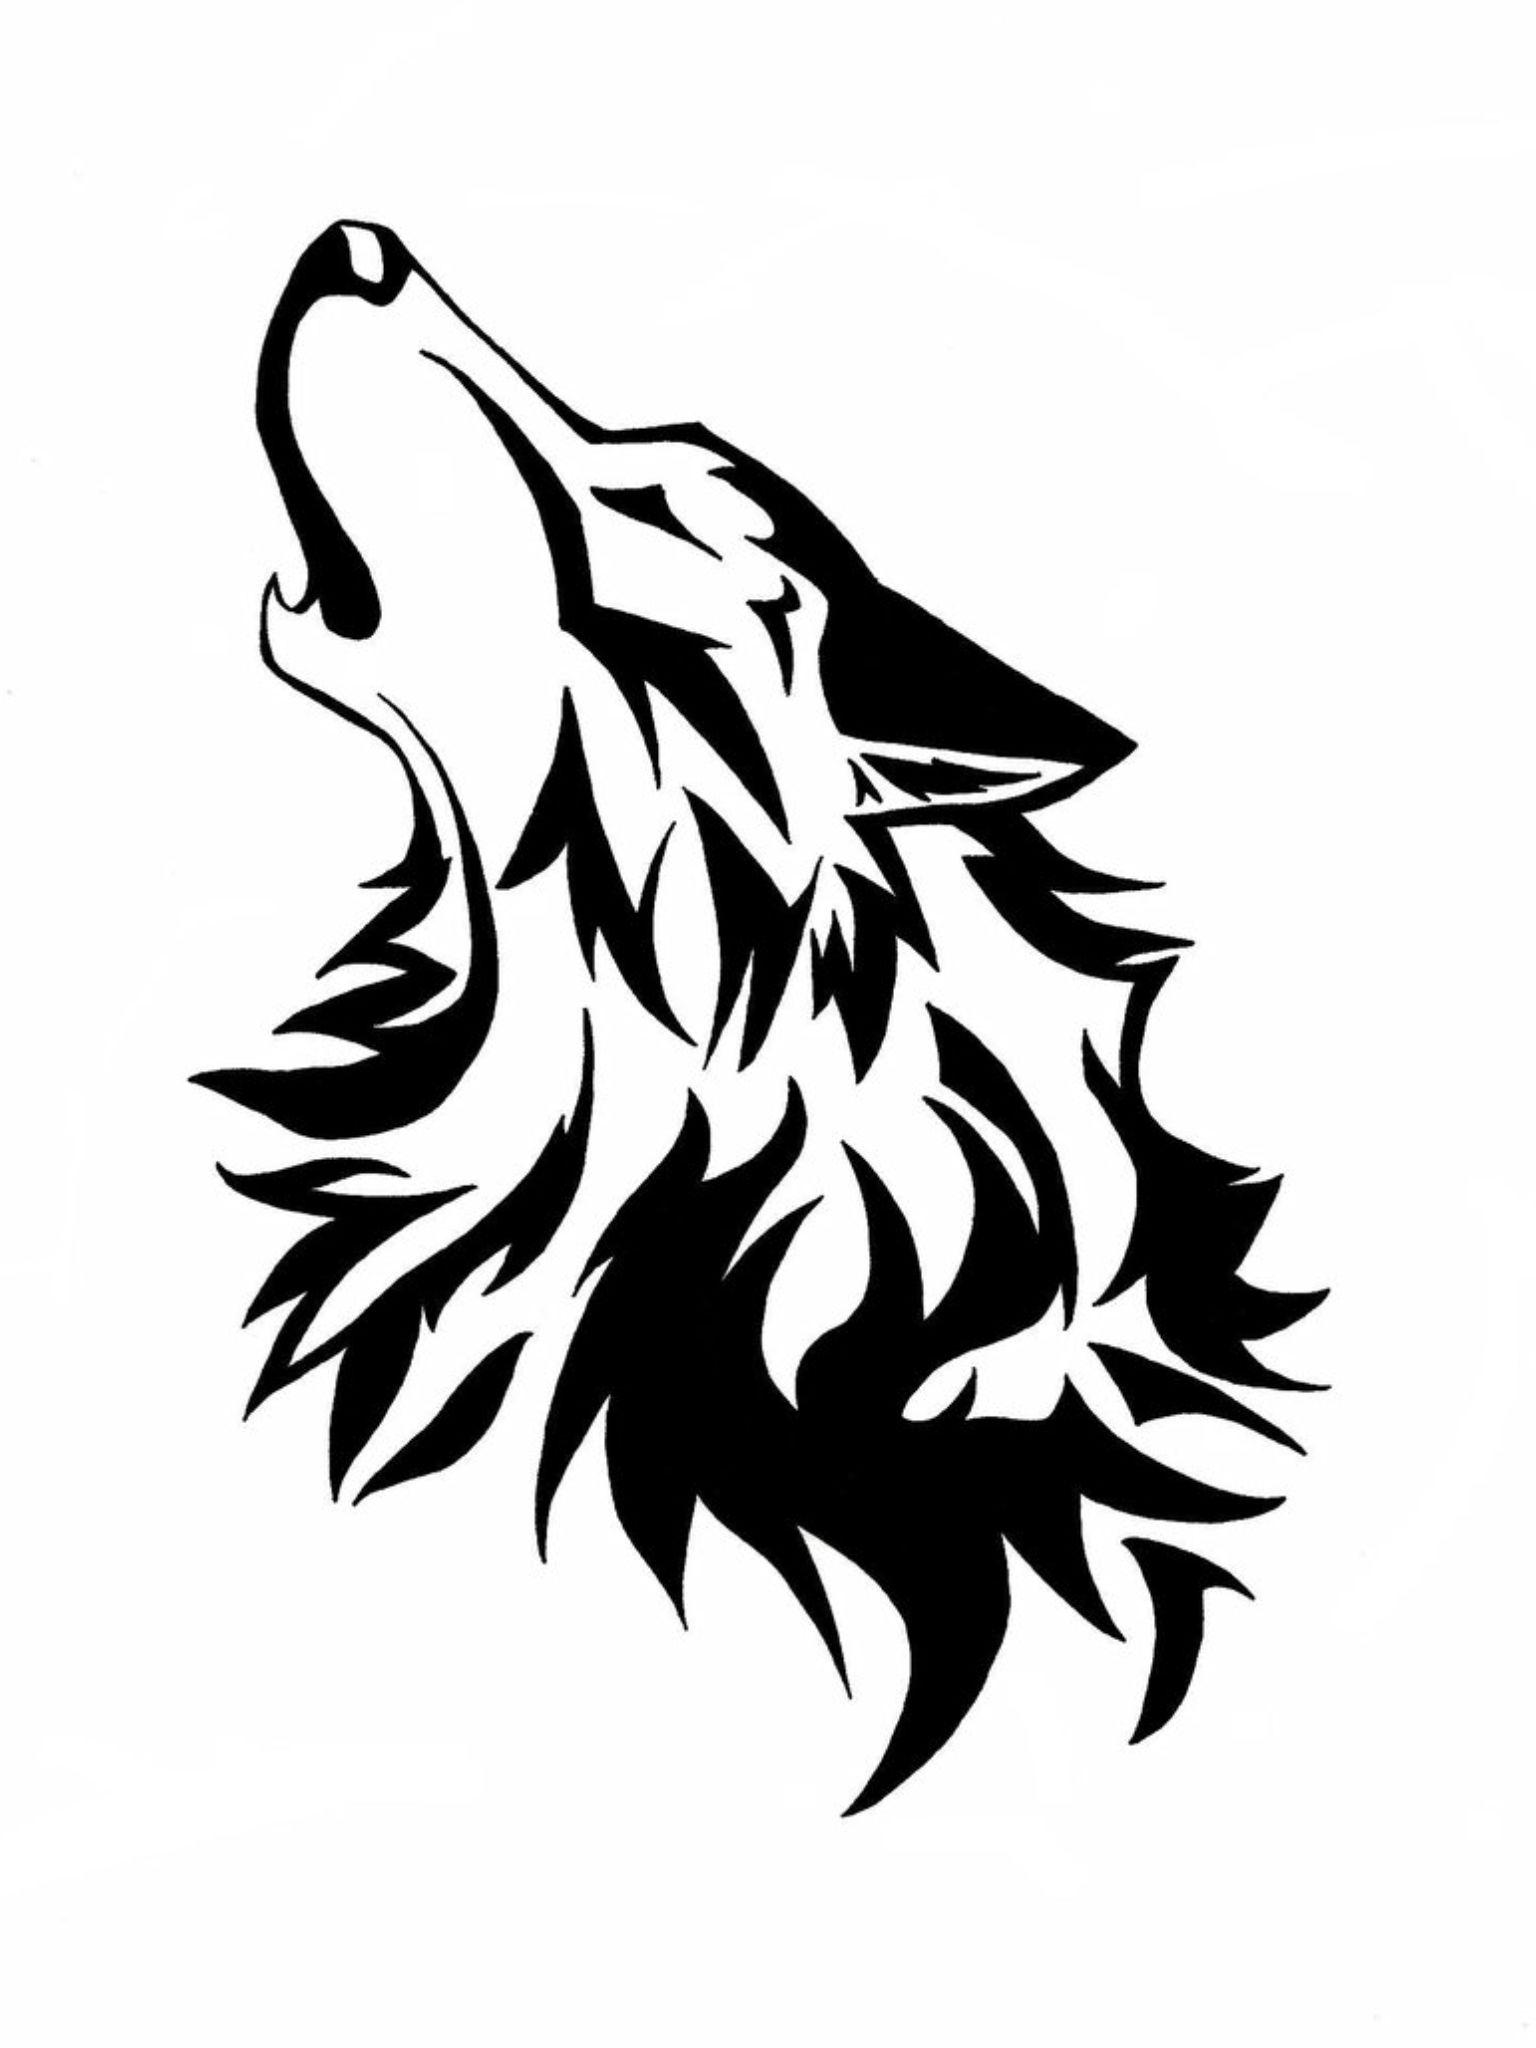 Black and Blue Wolf Logo - Free Howling Wolf Icon 237906 | Download Howling Wolf Icon - 237906